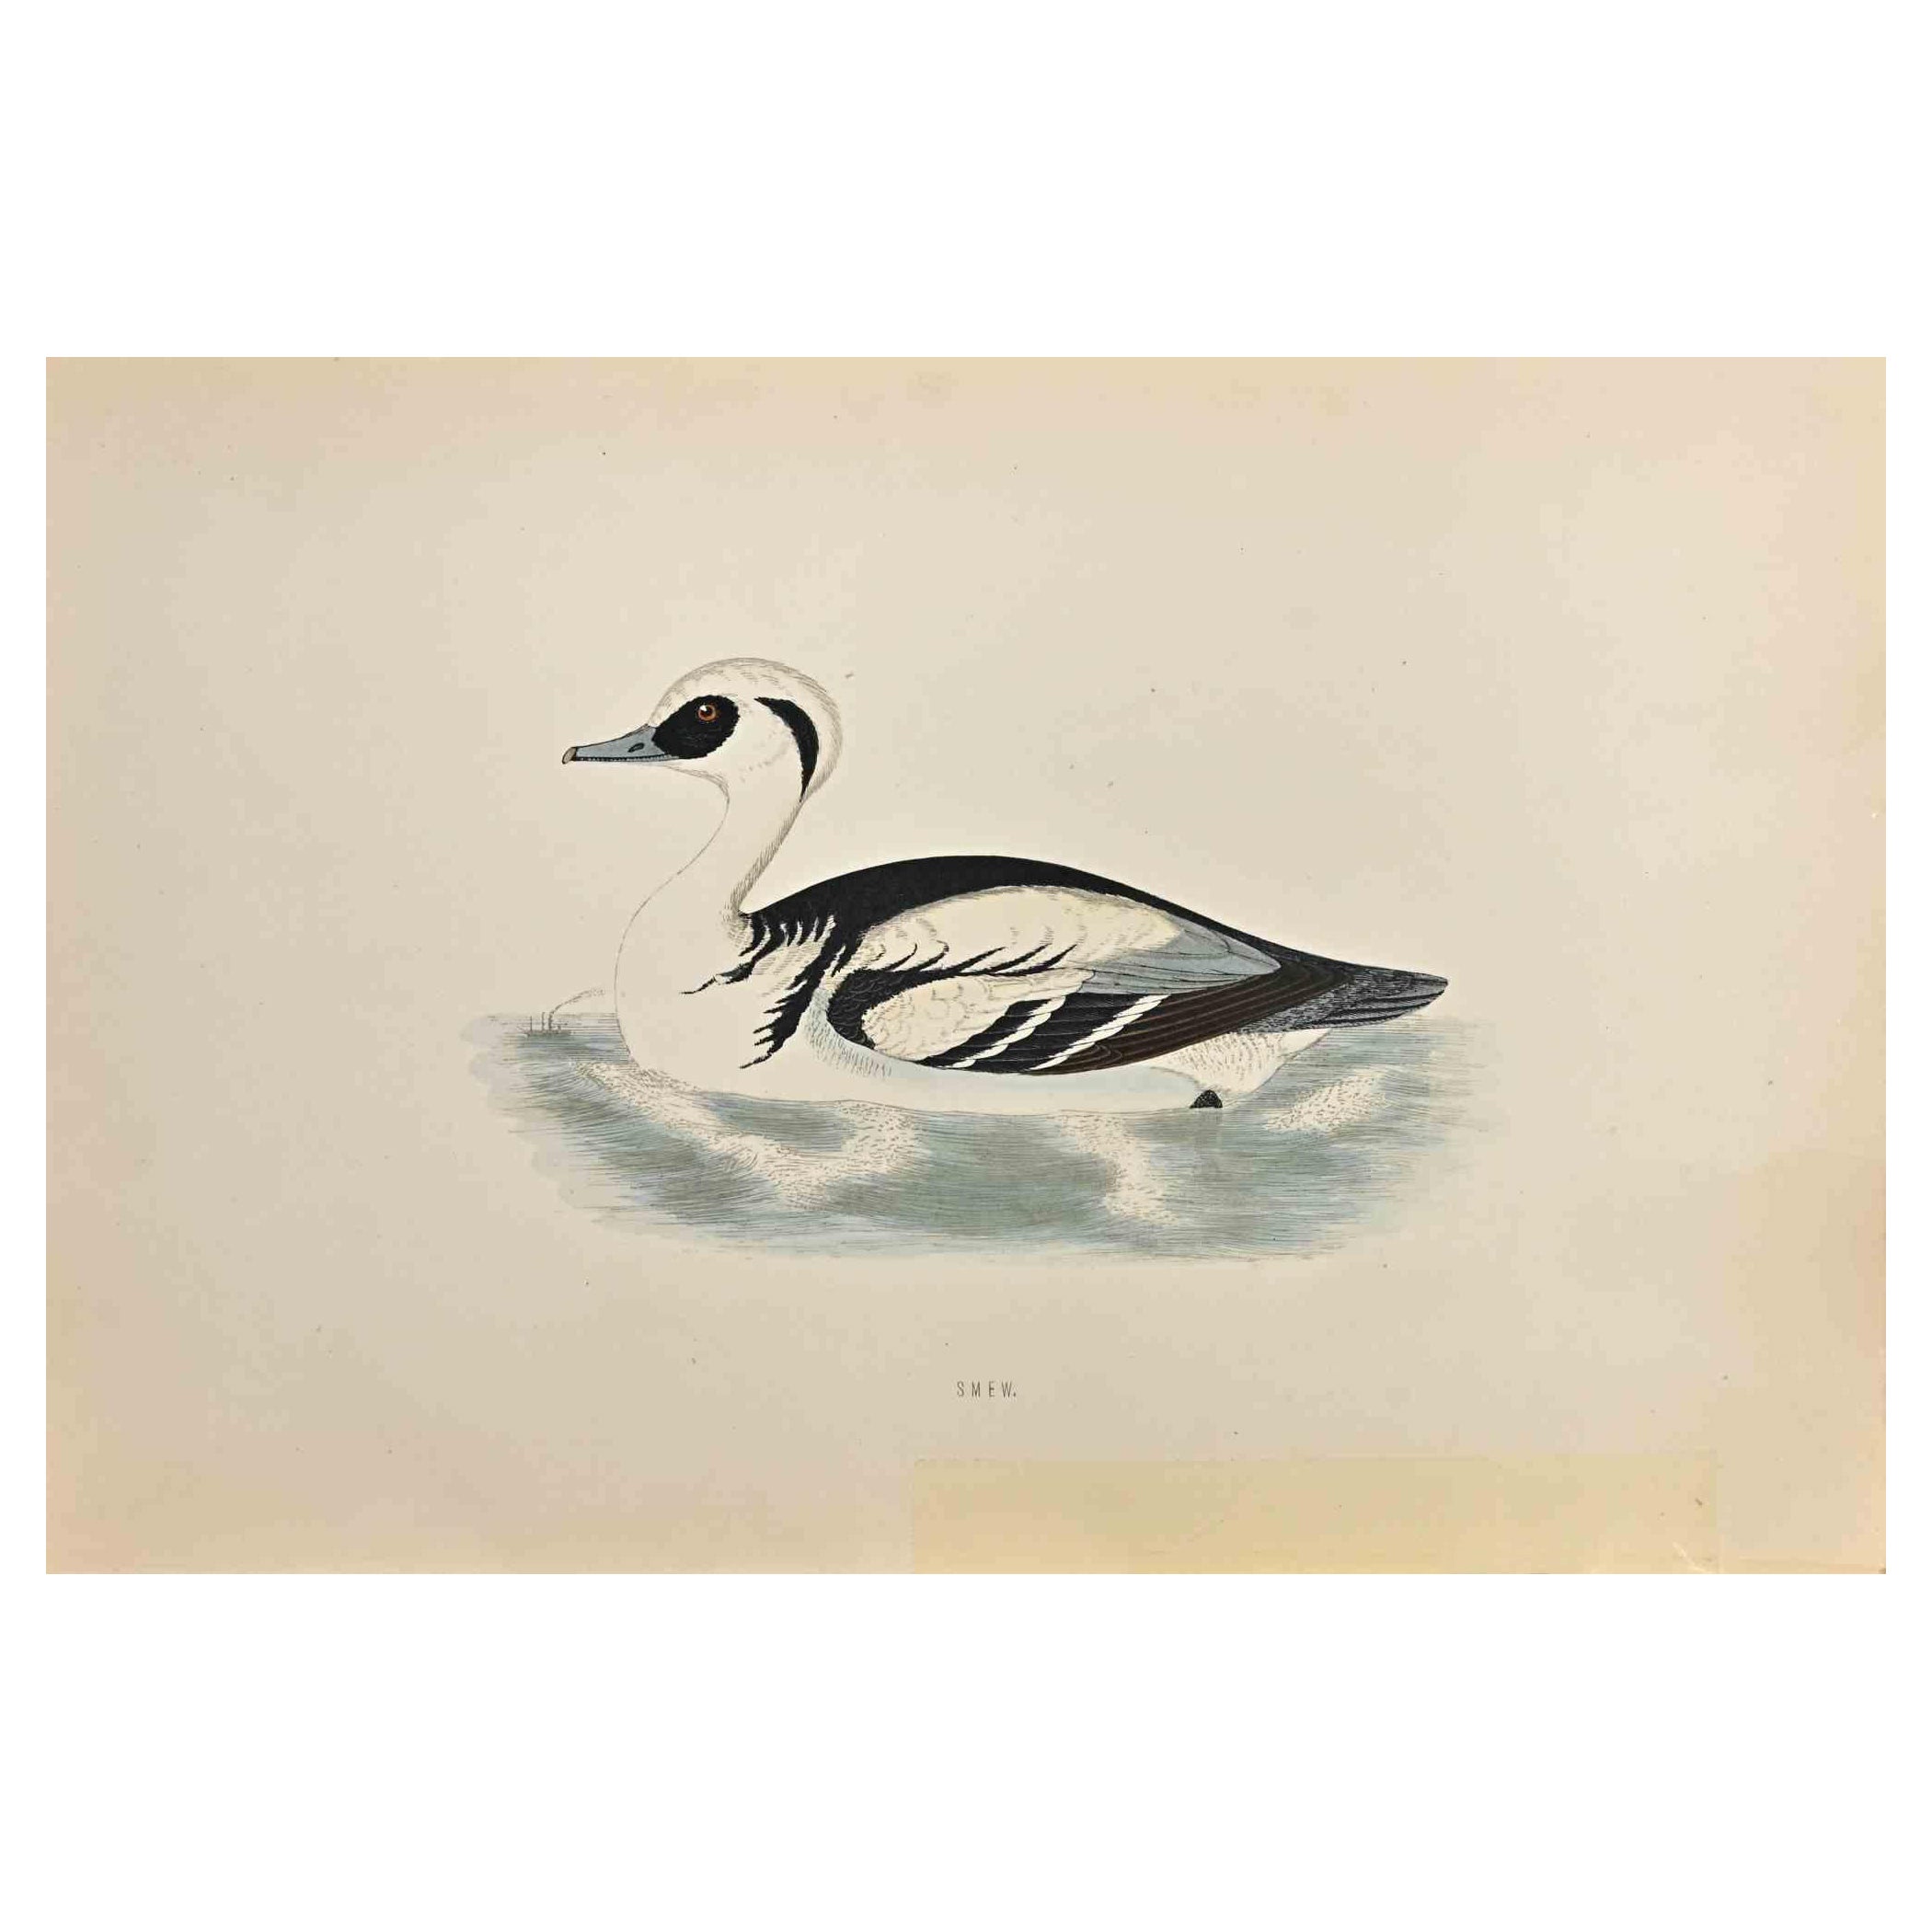 Smew is a modern artwork realized in 1870 by the British artist Alexander Francis Lydon (1836-1917) . 

Woodcut print, hand colored, published by London, Bell & Sons, 1870.  Name of the bird printed in plate. This work is part of a print suite